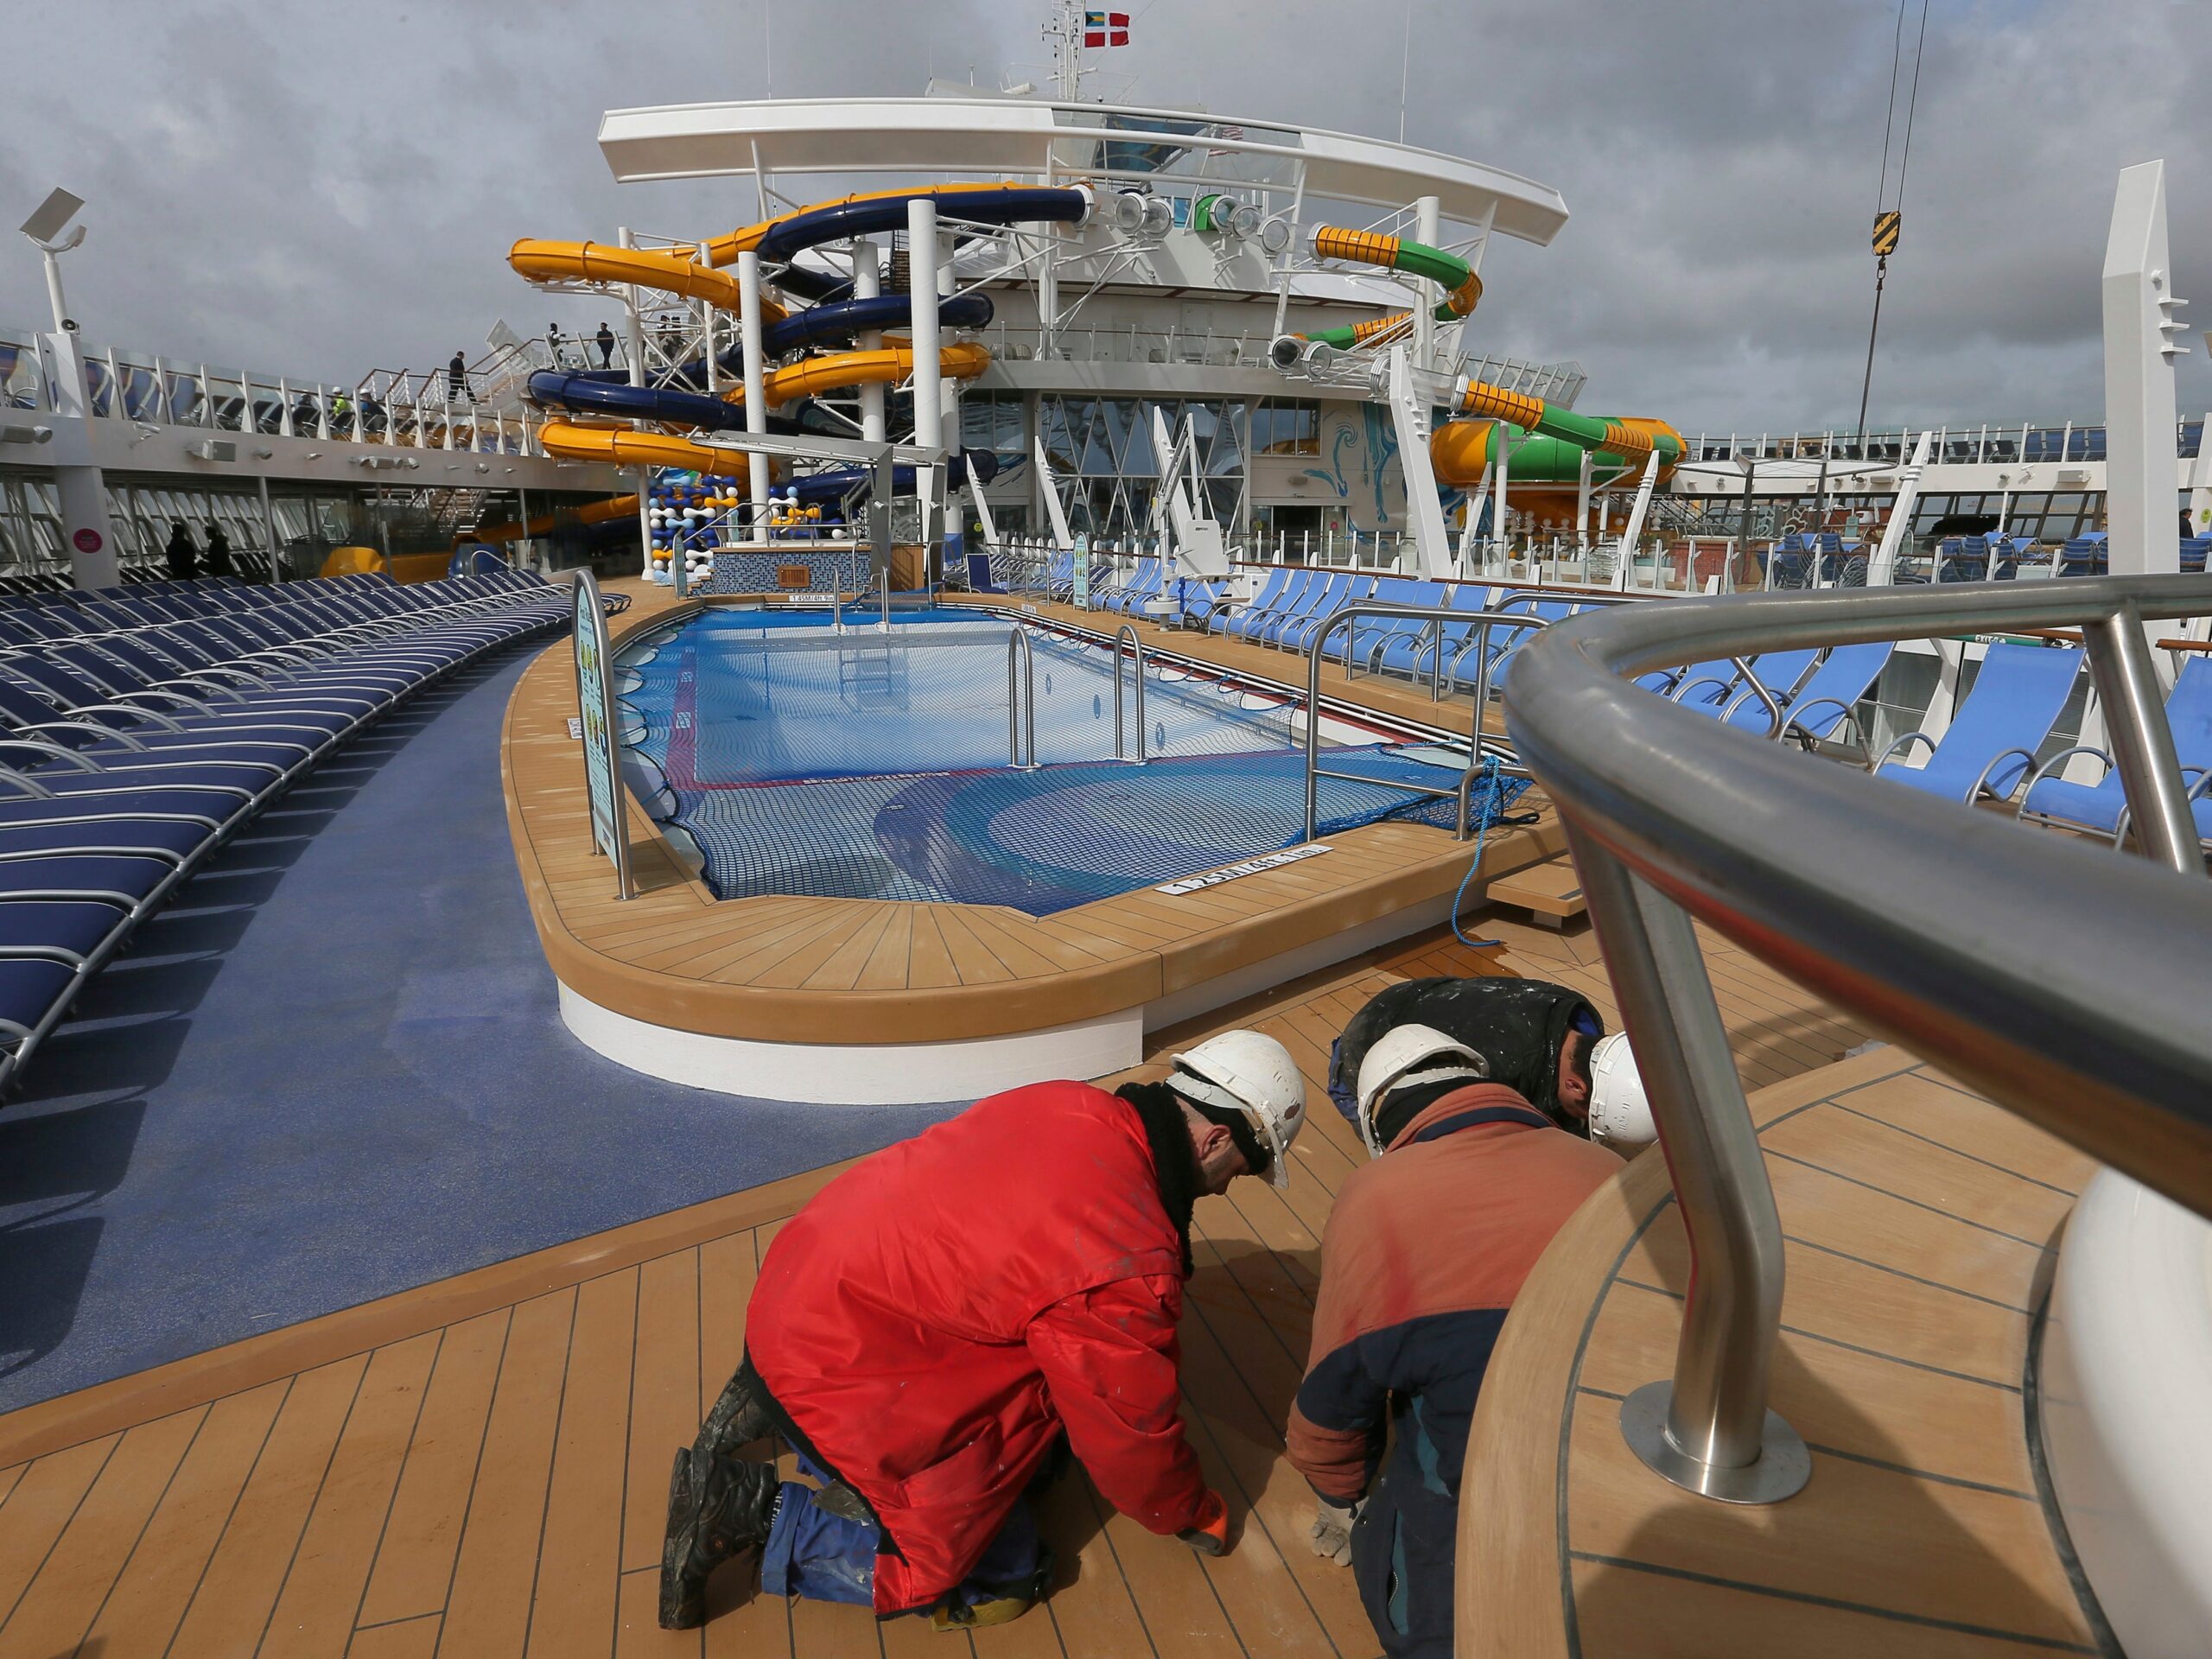 Workers near the swimming pool aboard The Symphony of the Seas, the world's largest cruise ship, docking at Saint Nazaire port, western France, Friday, March 23, 2018.